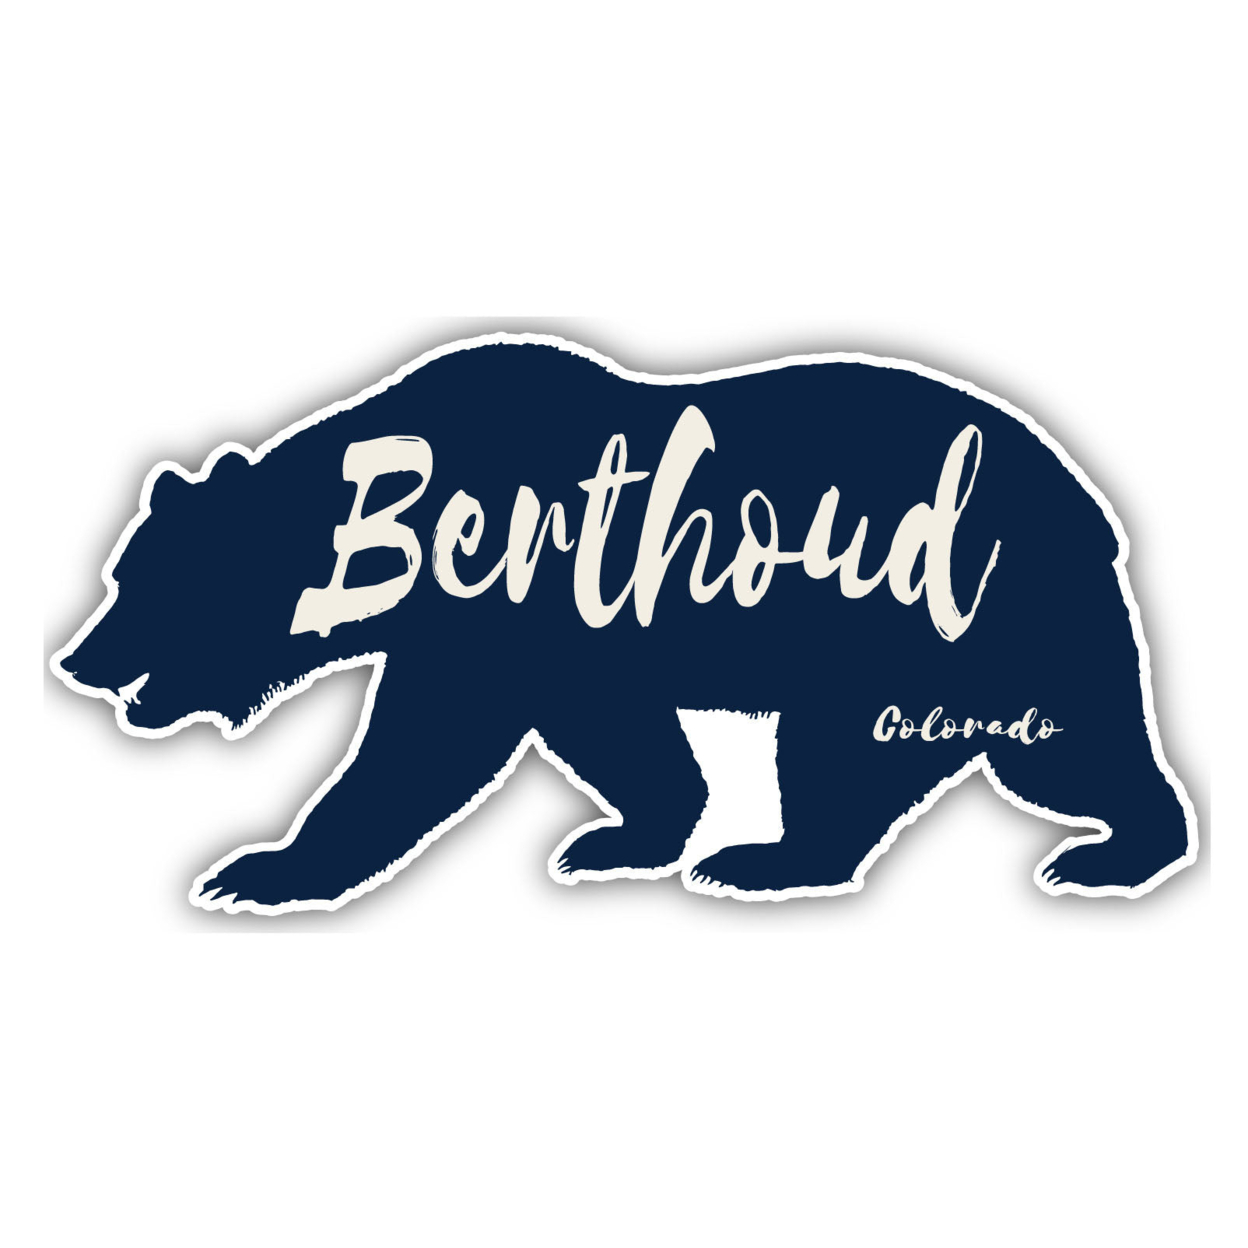 Berthoud Colorado Souvenir Decorative Stickers (Choose Theme And Size) - 4-Pack, 6-Inch, Adventures Awaits